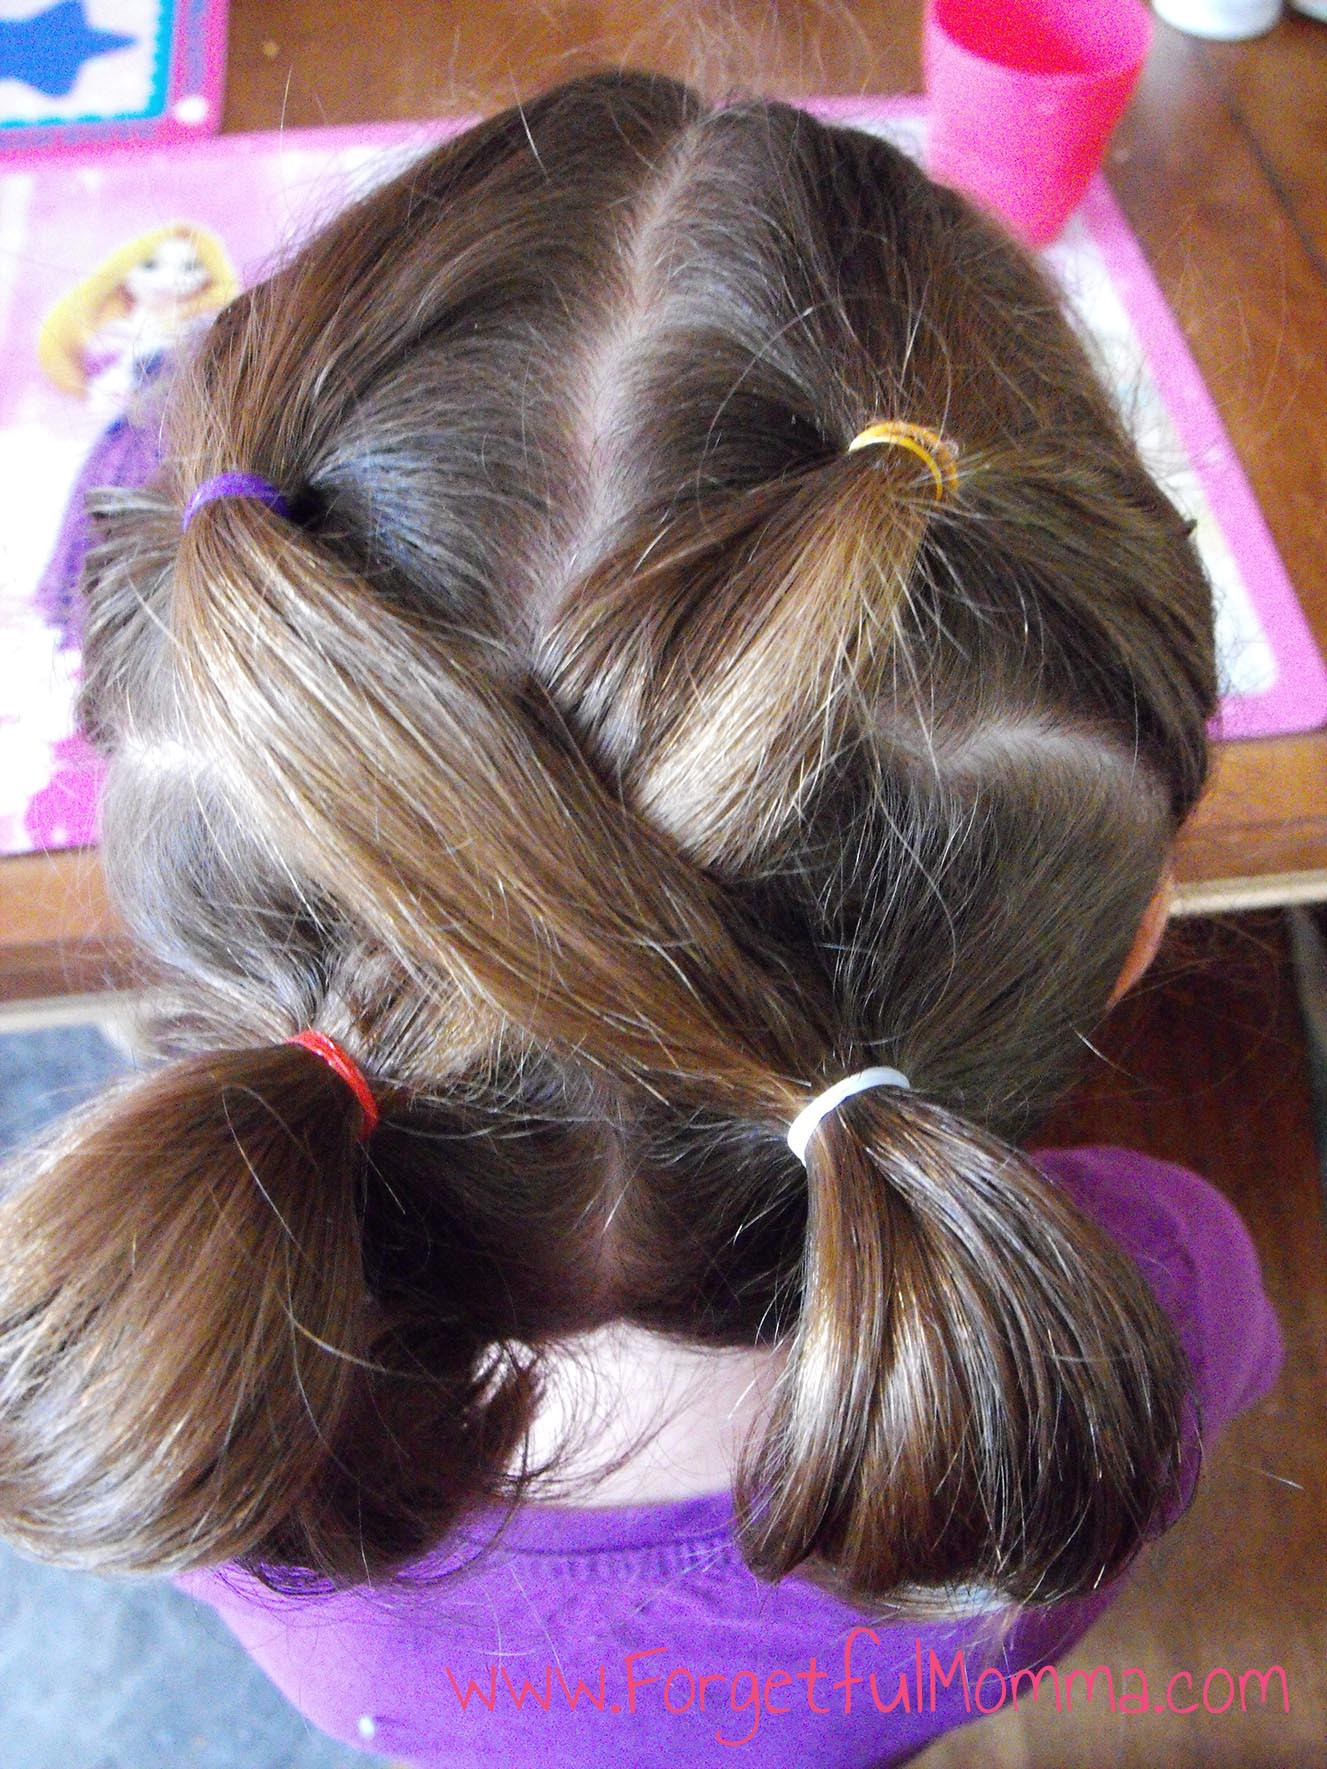 Girl Hairstyles For School
 Back to School Hair for Little Girls For ful Momma